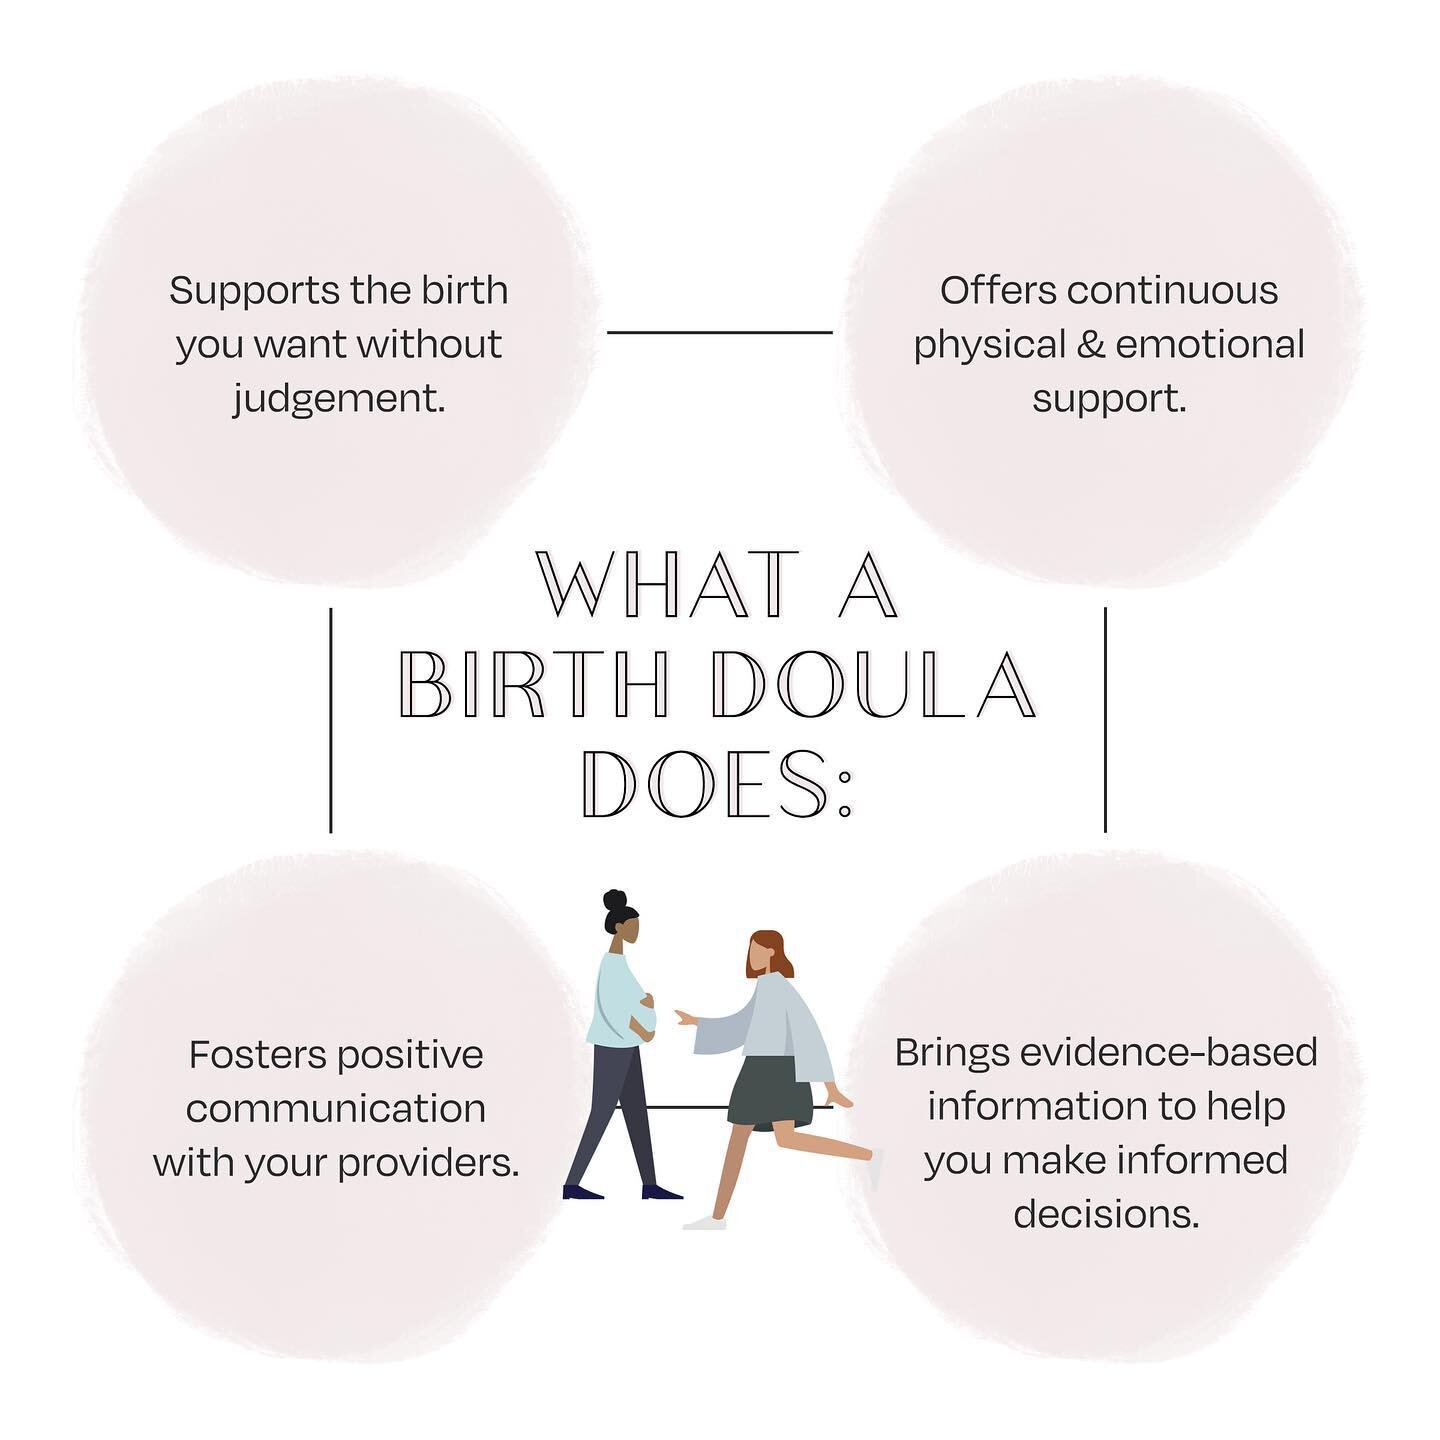 One of the most common questions I&rsquo;m asked is, &ldquo;what does a Birth Doula do?&rdquo; Check out these simple infographics by @protivacreative that answer that question!

Support is individualized and will always look different for every mama